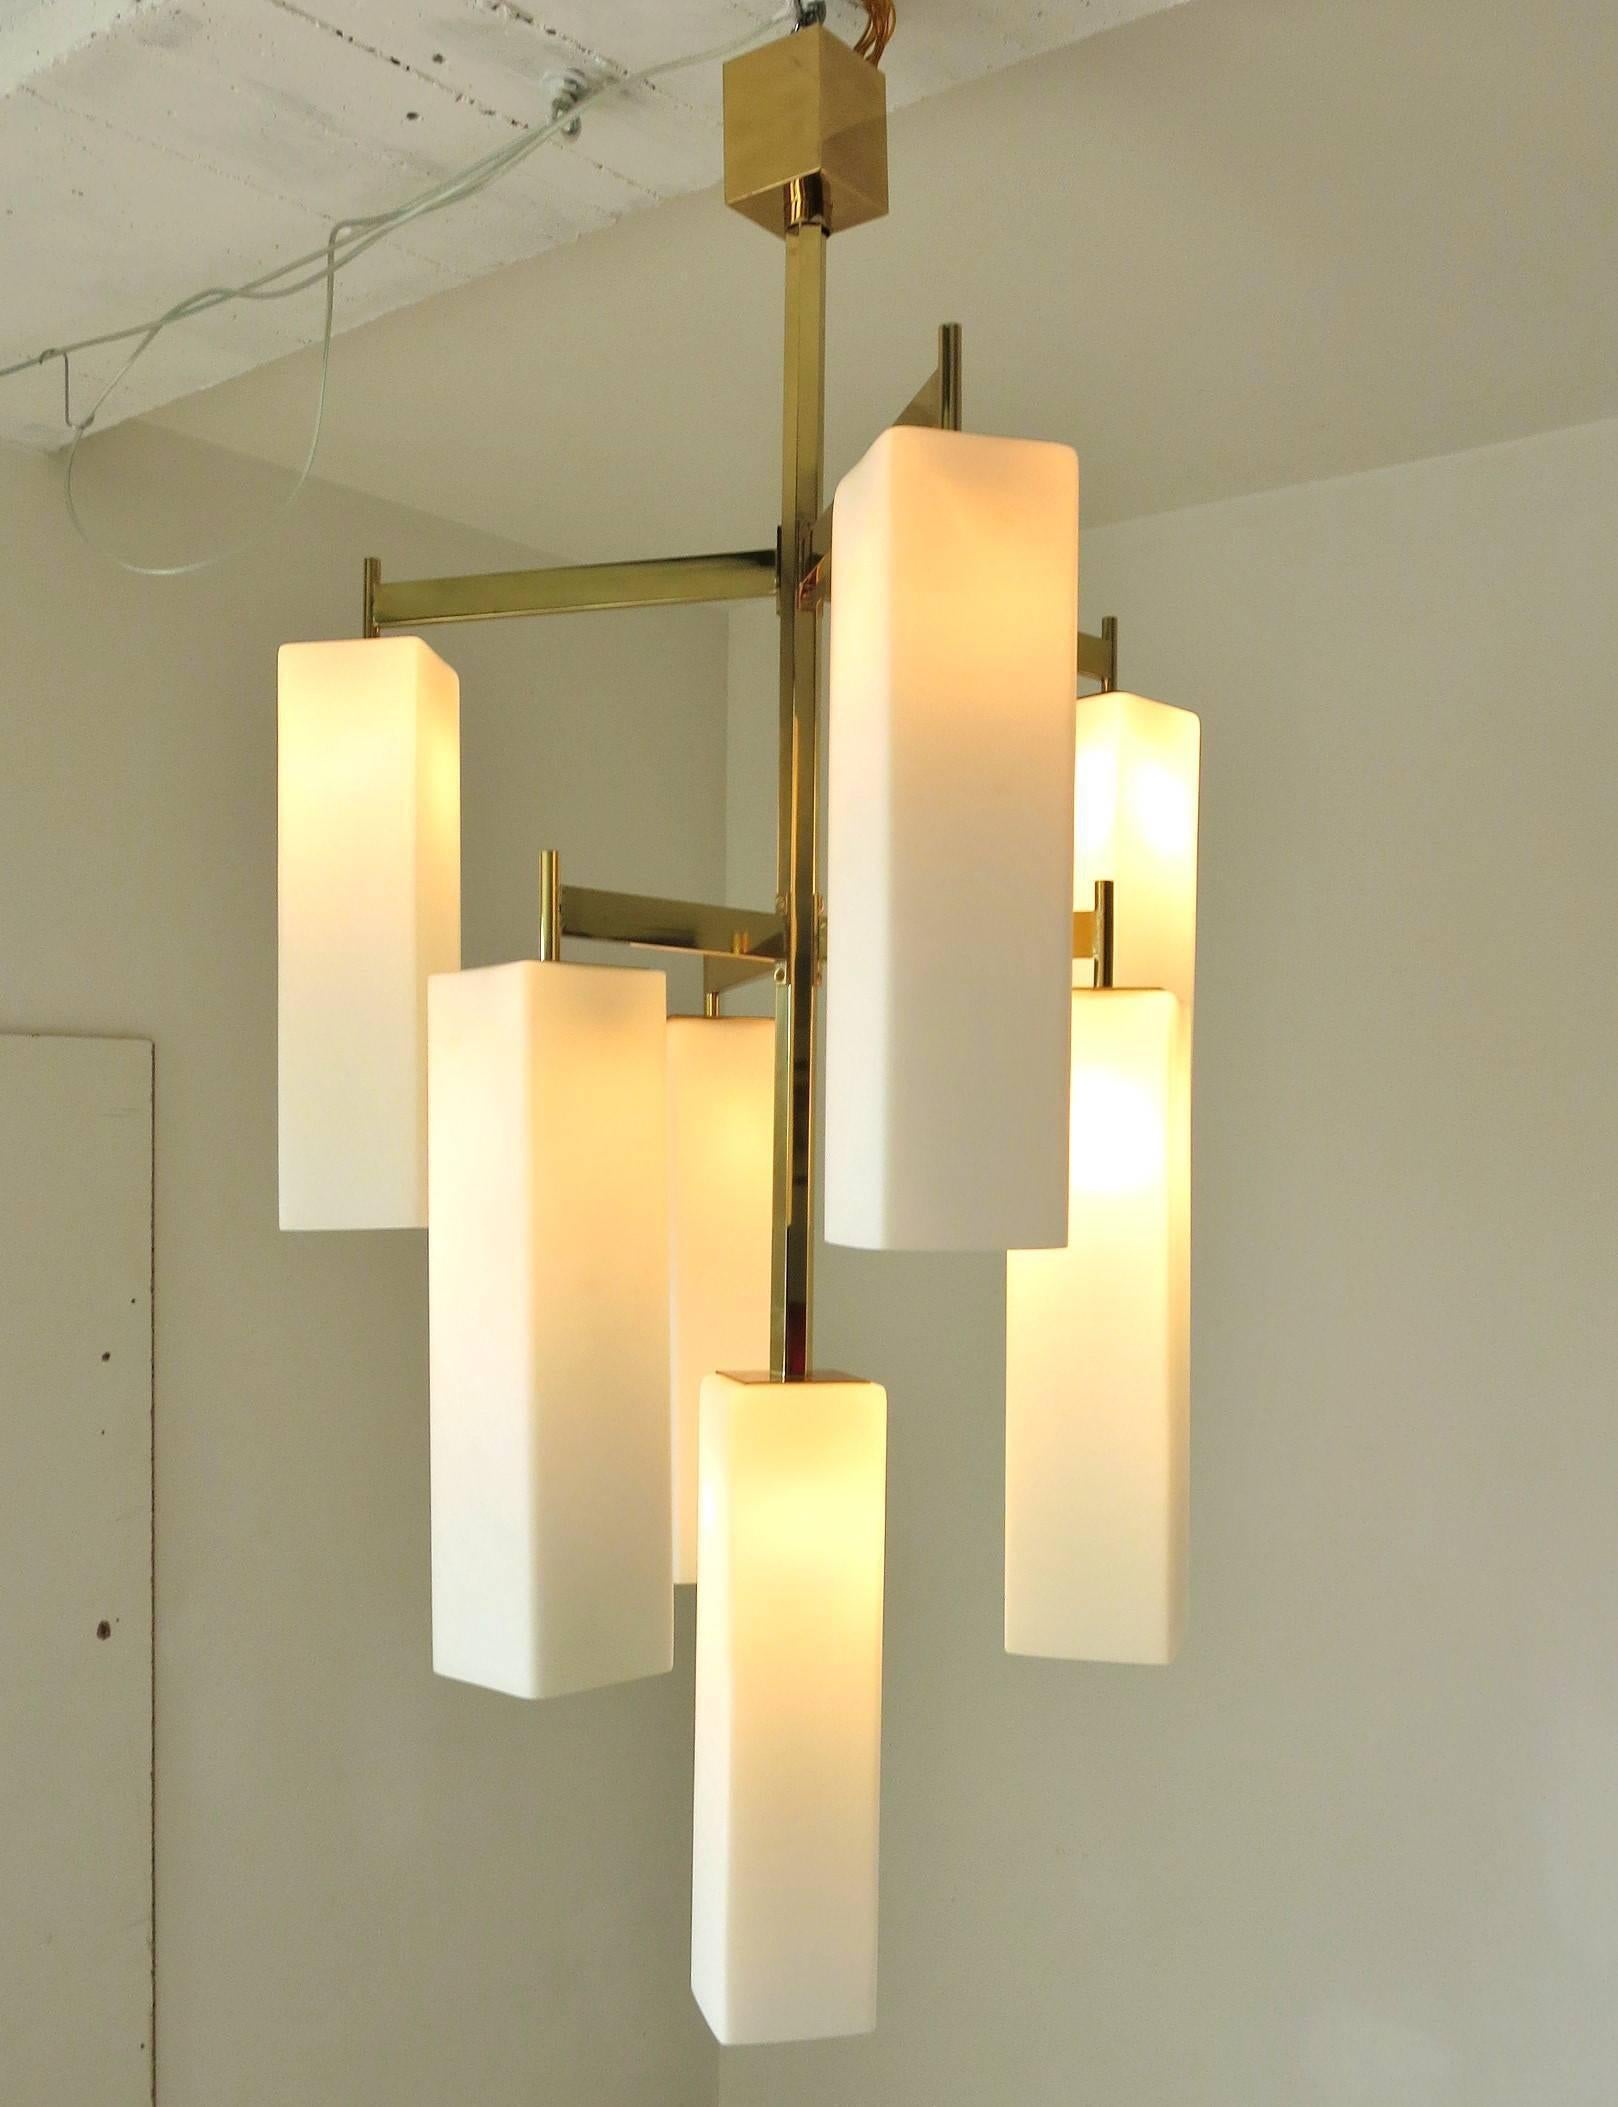 Italian modern chandelier with frosted white rectangular Murano glass shades, mounted on polished brass frame / Made in Italy 2017.